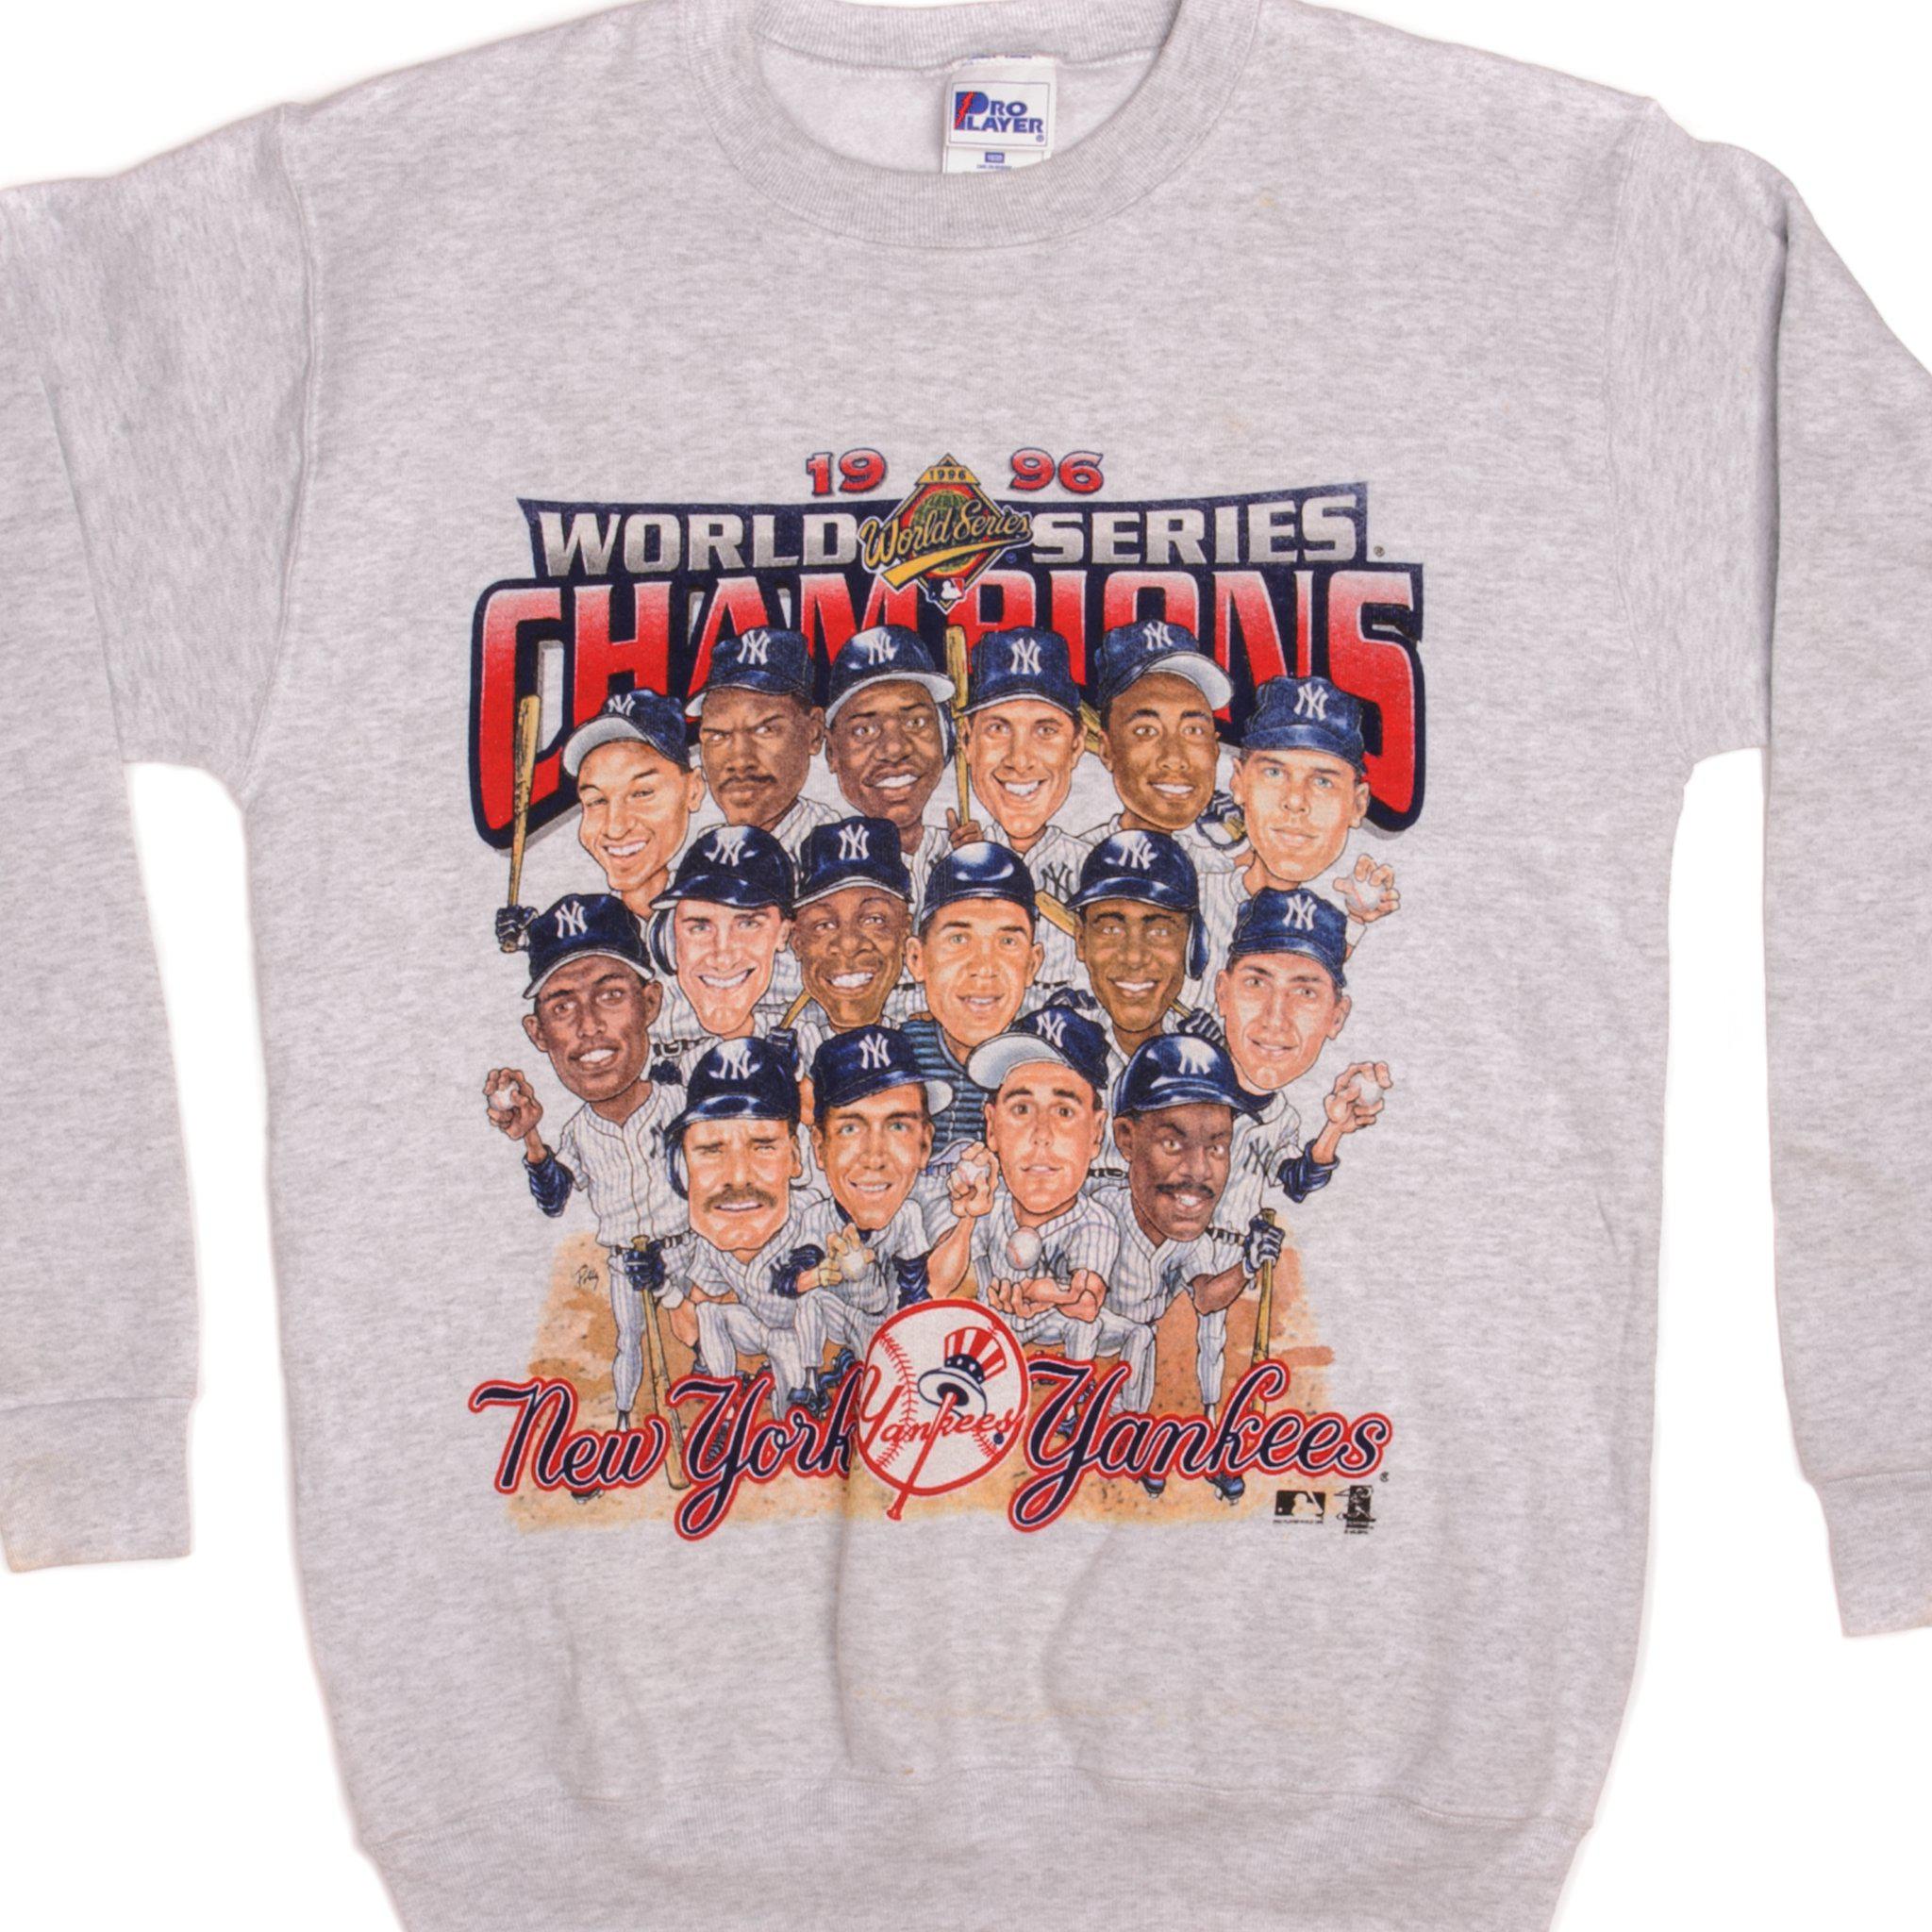 New York Yankees Vintage 90s Champions T-Shirt - Pro Player White Tee - MLB  Baseball - Official Clubhouse Shirt - Size XL - Free SHIPPING